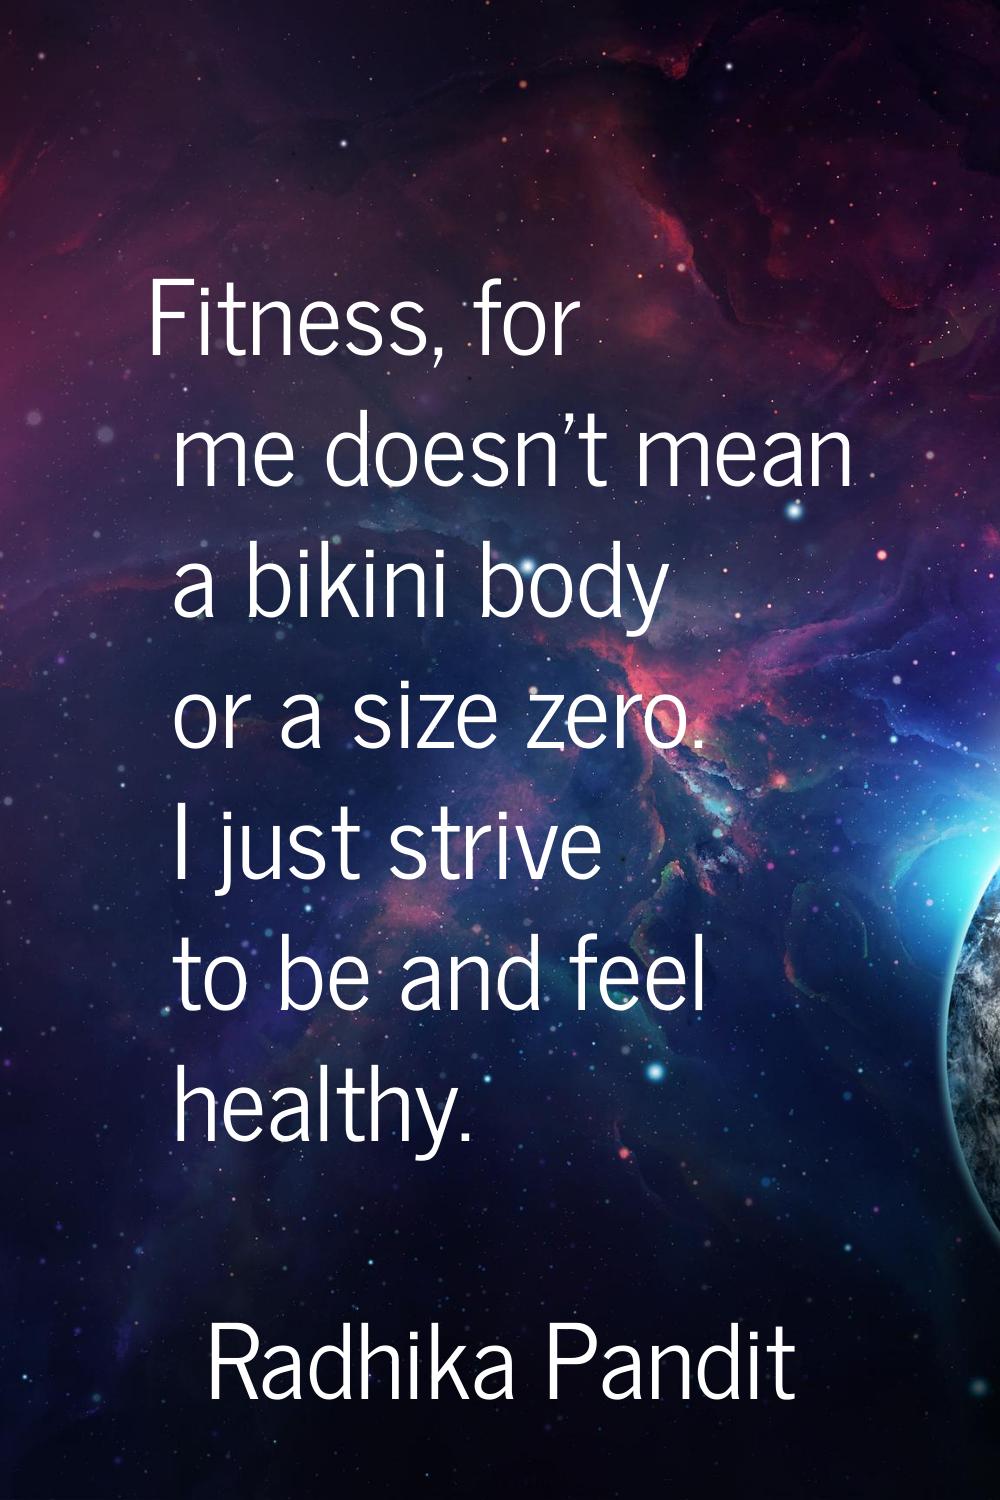 Fitness, for me doesn't mean a bikini body or a size zero. I just strive to be and feel healthy.